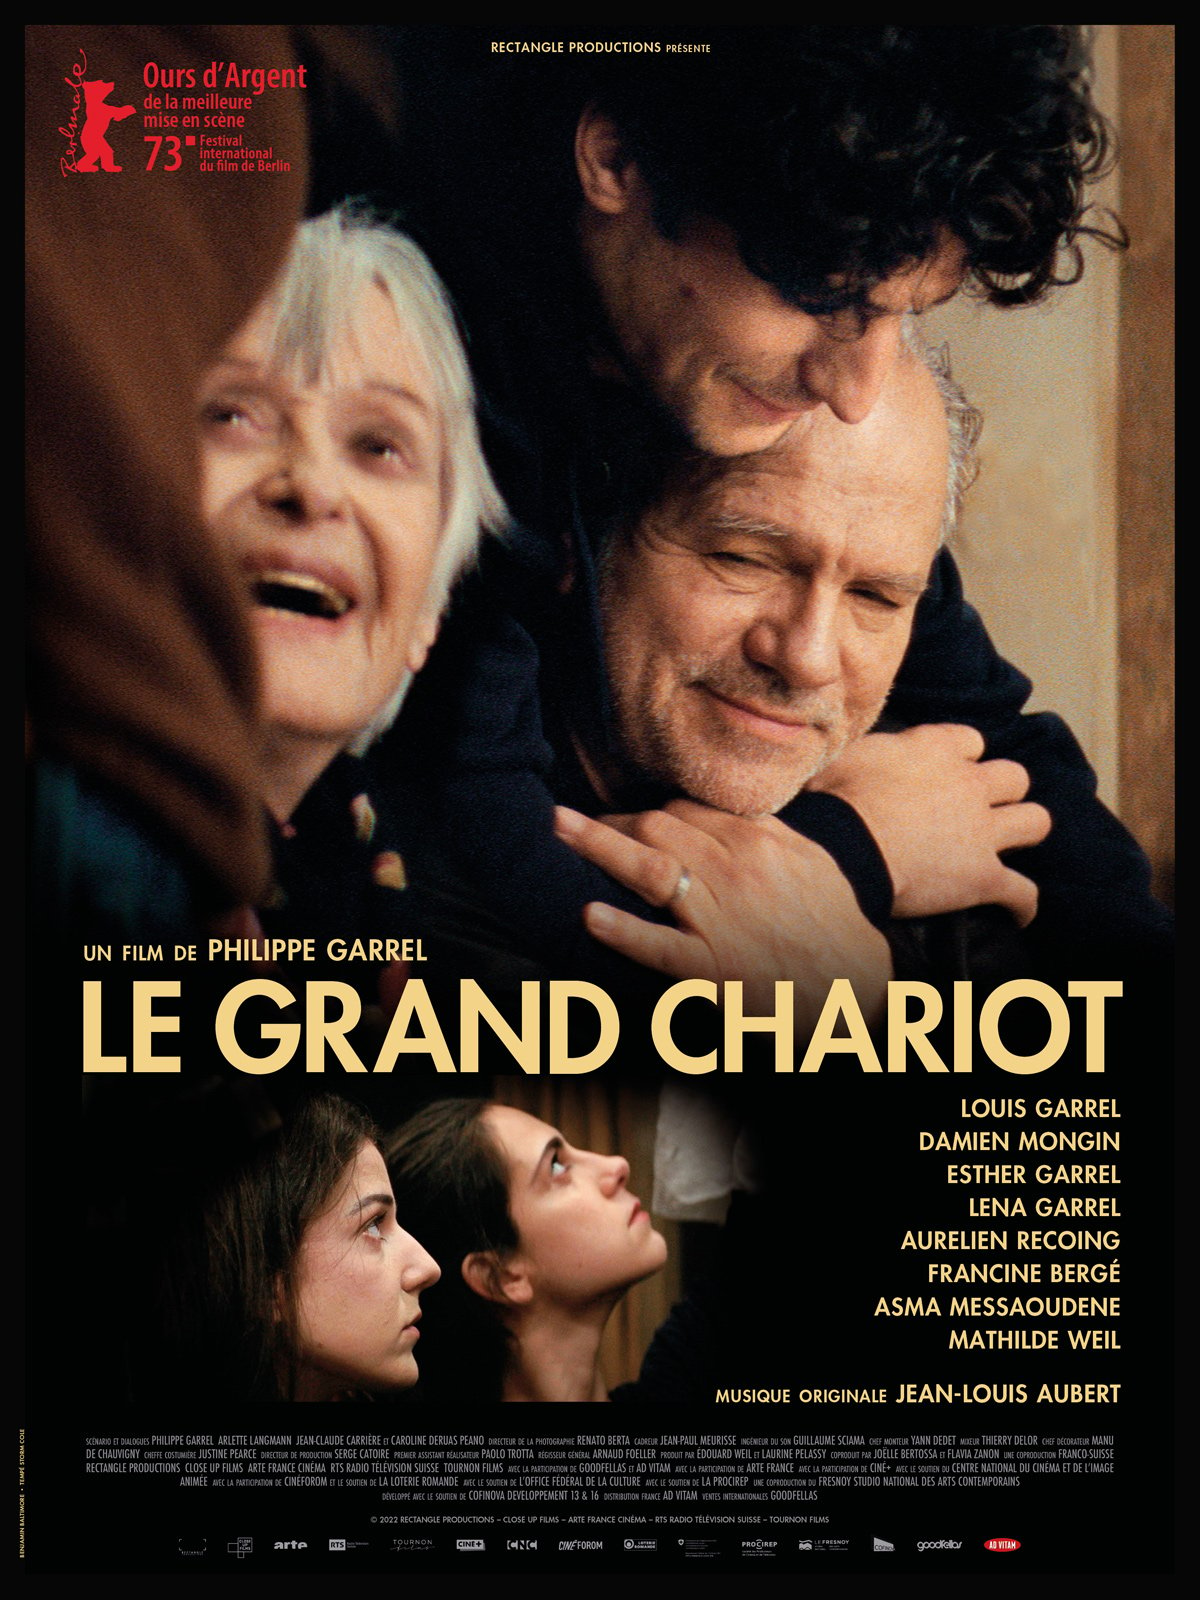 Voir Film Le Grand chariot - film 2023 streaming VF gratuit complet